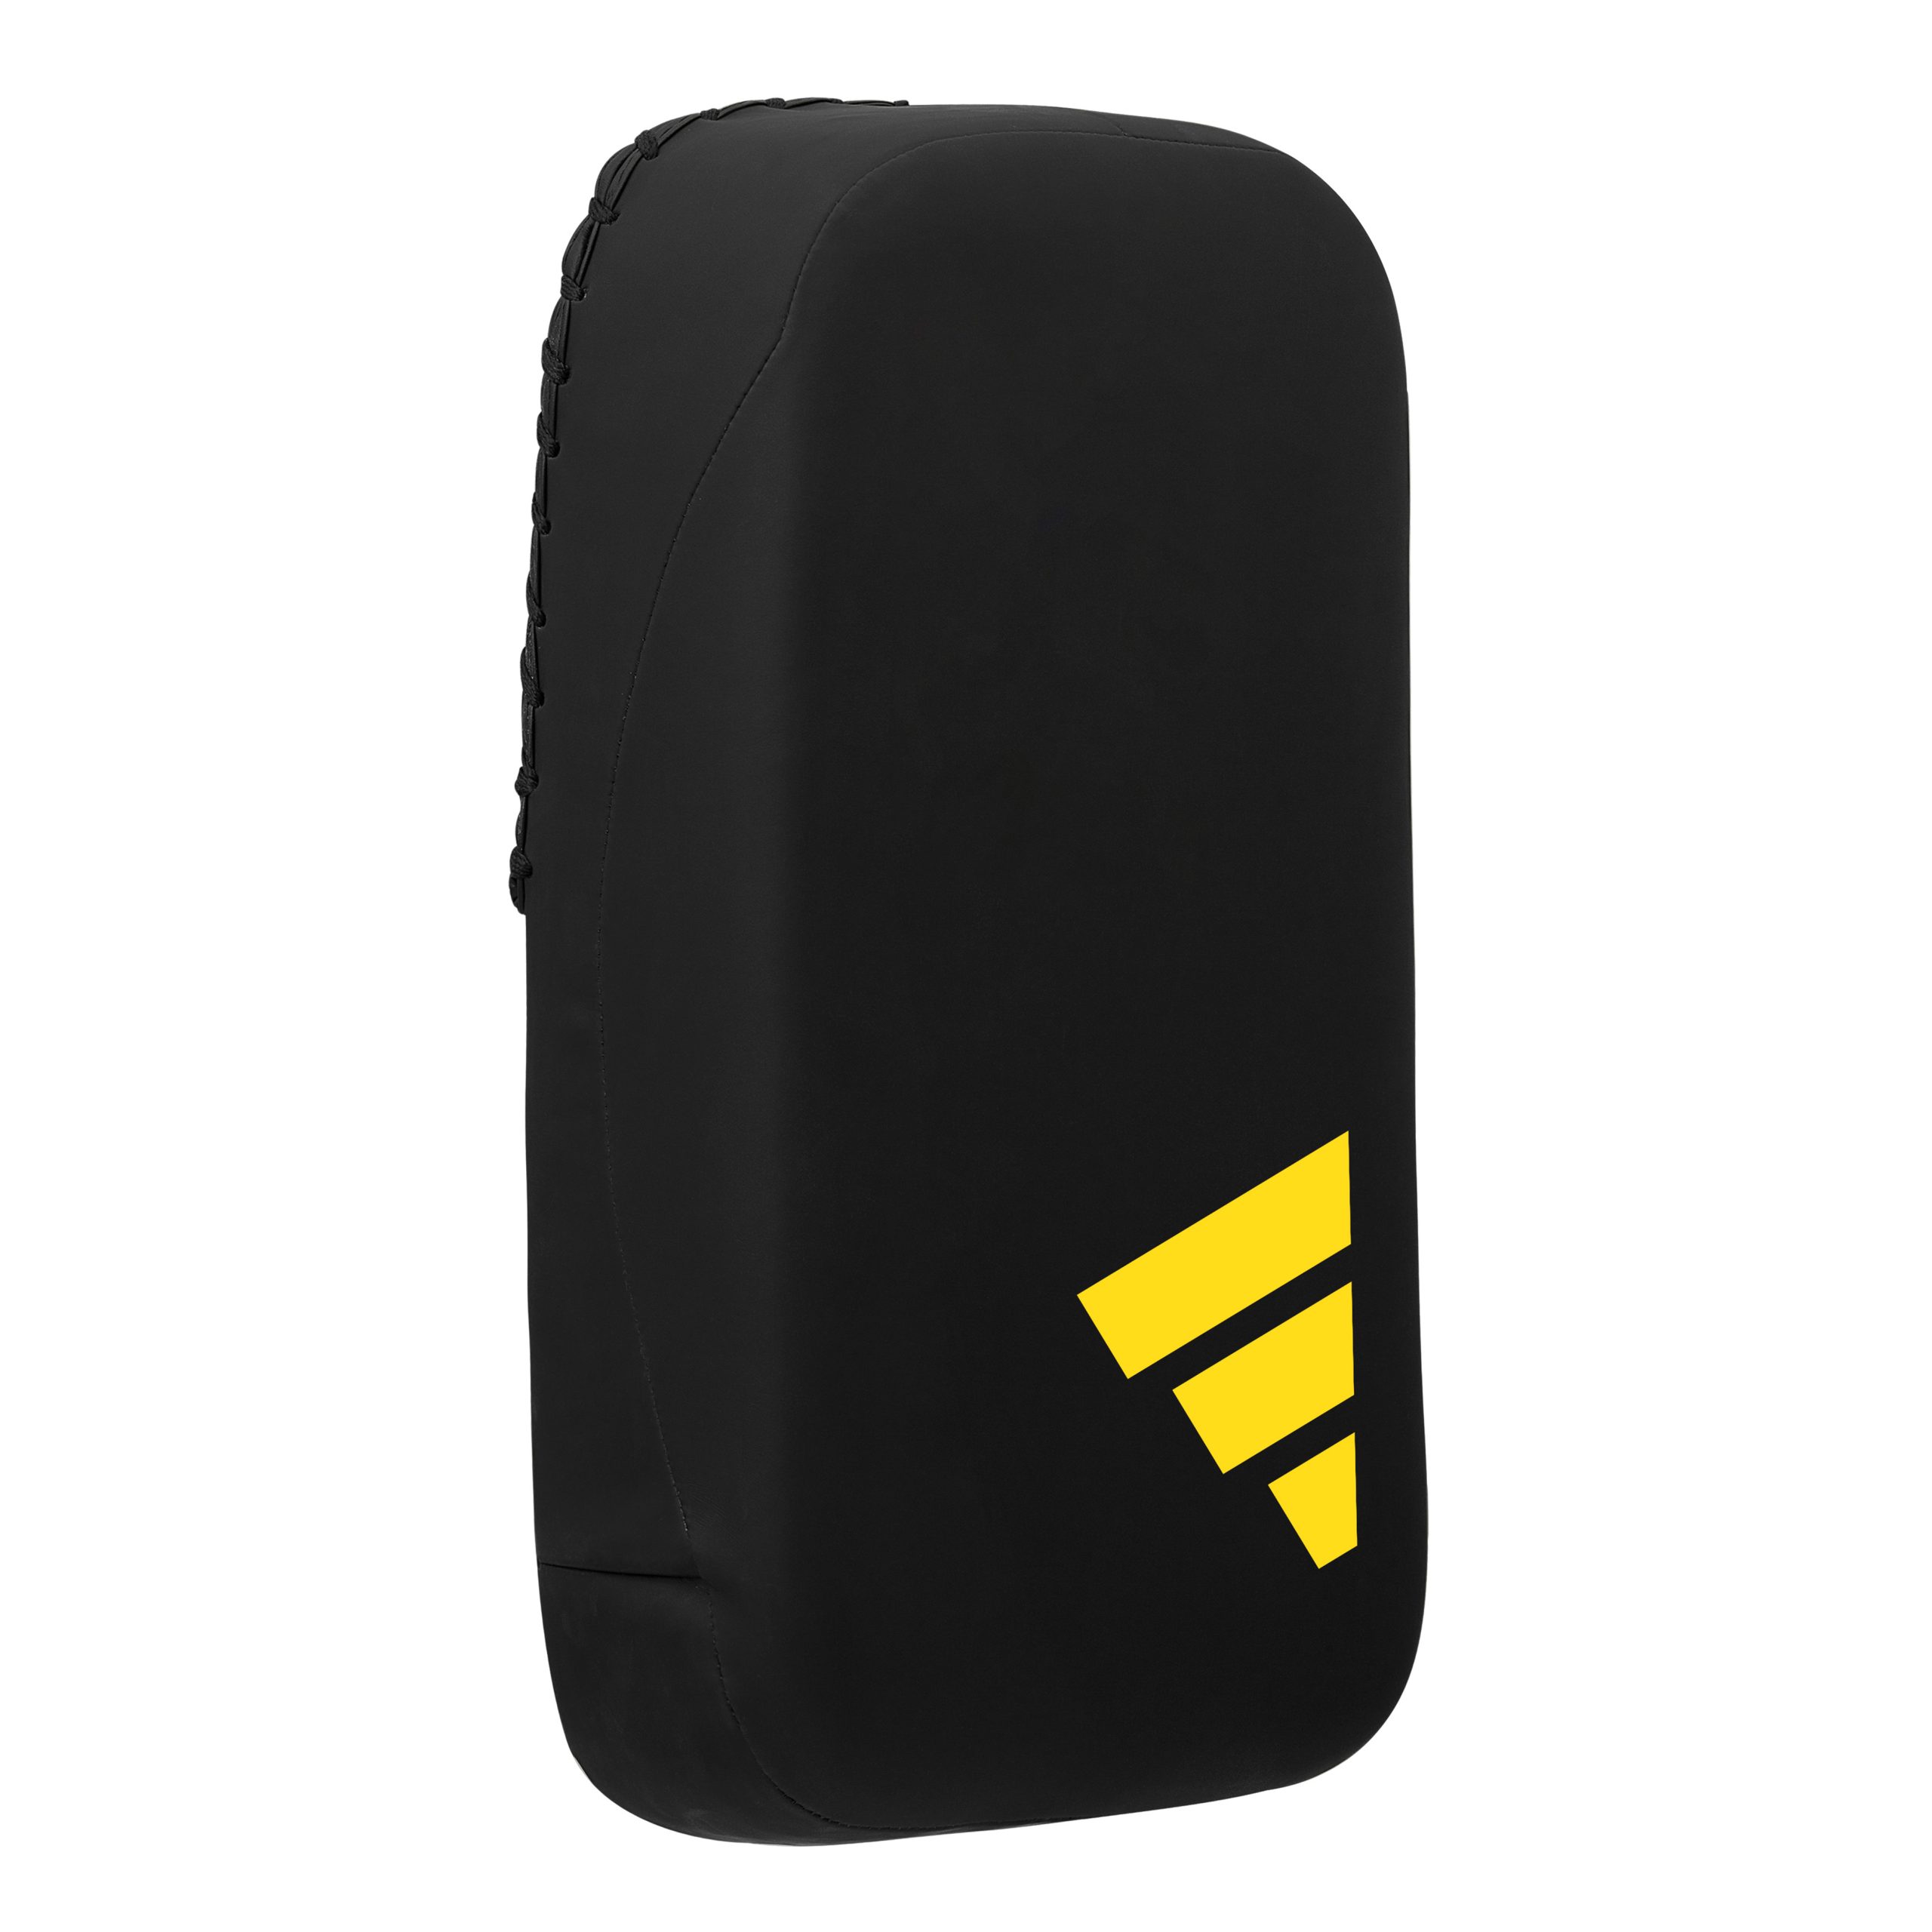 Adidas x Anderson Silva Co-Branded Thigh Pad for MMA Training